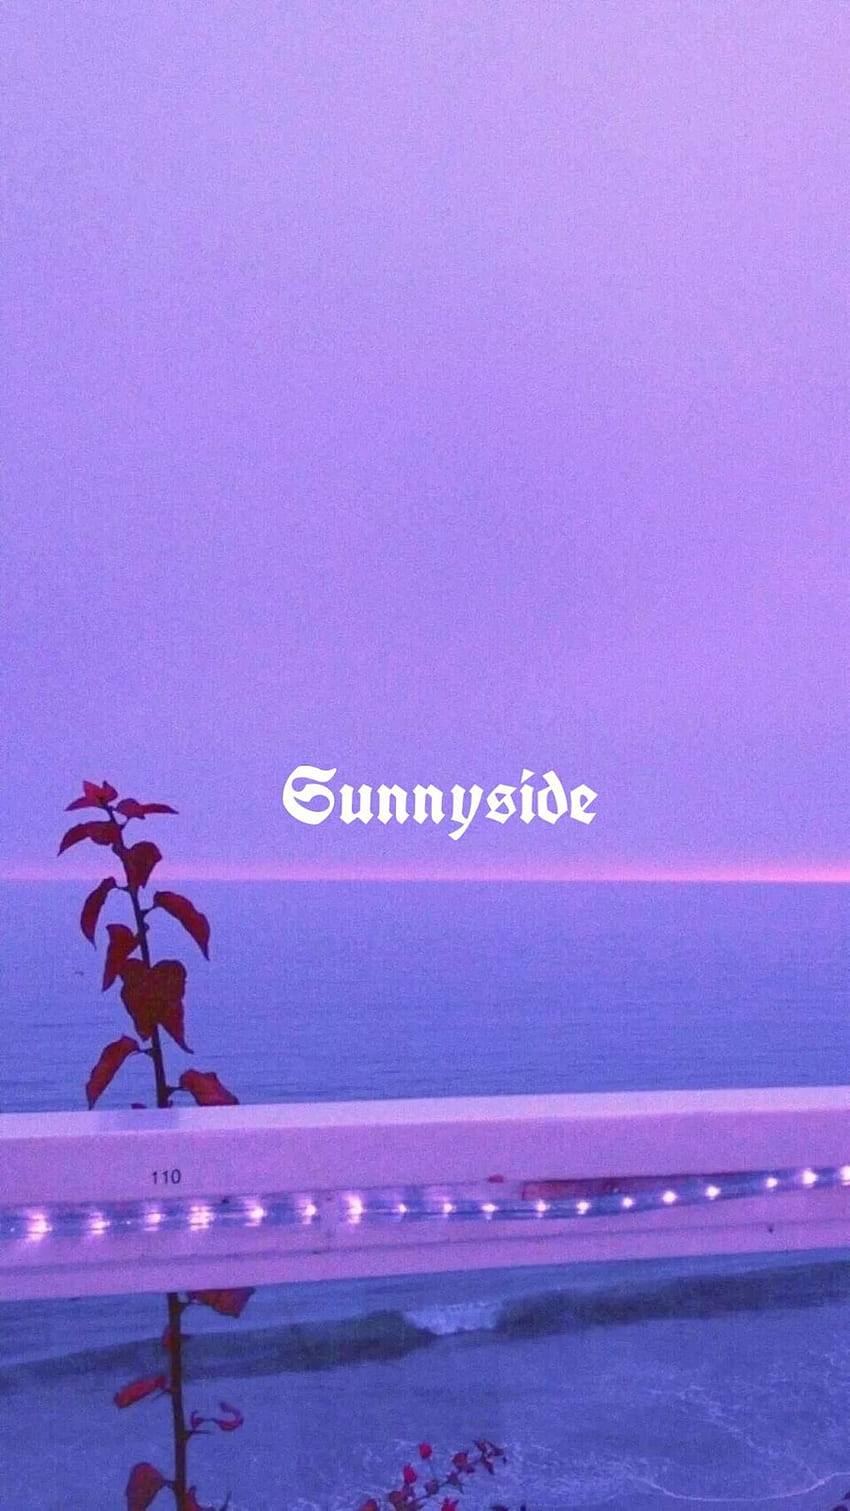 Aesthetic phone background of a purple sunset with the word 